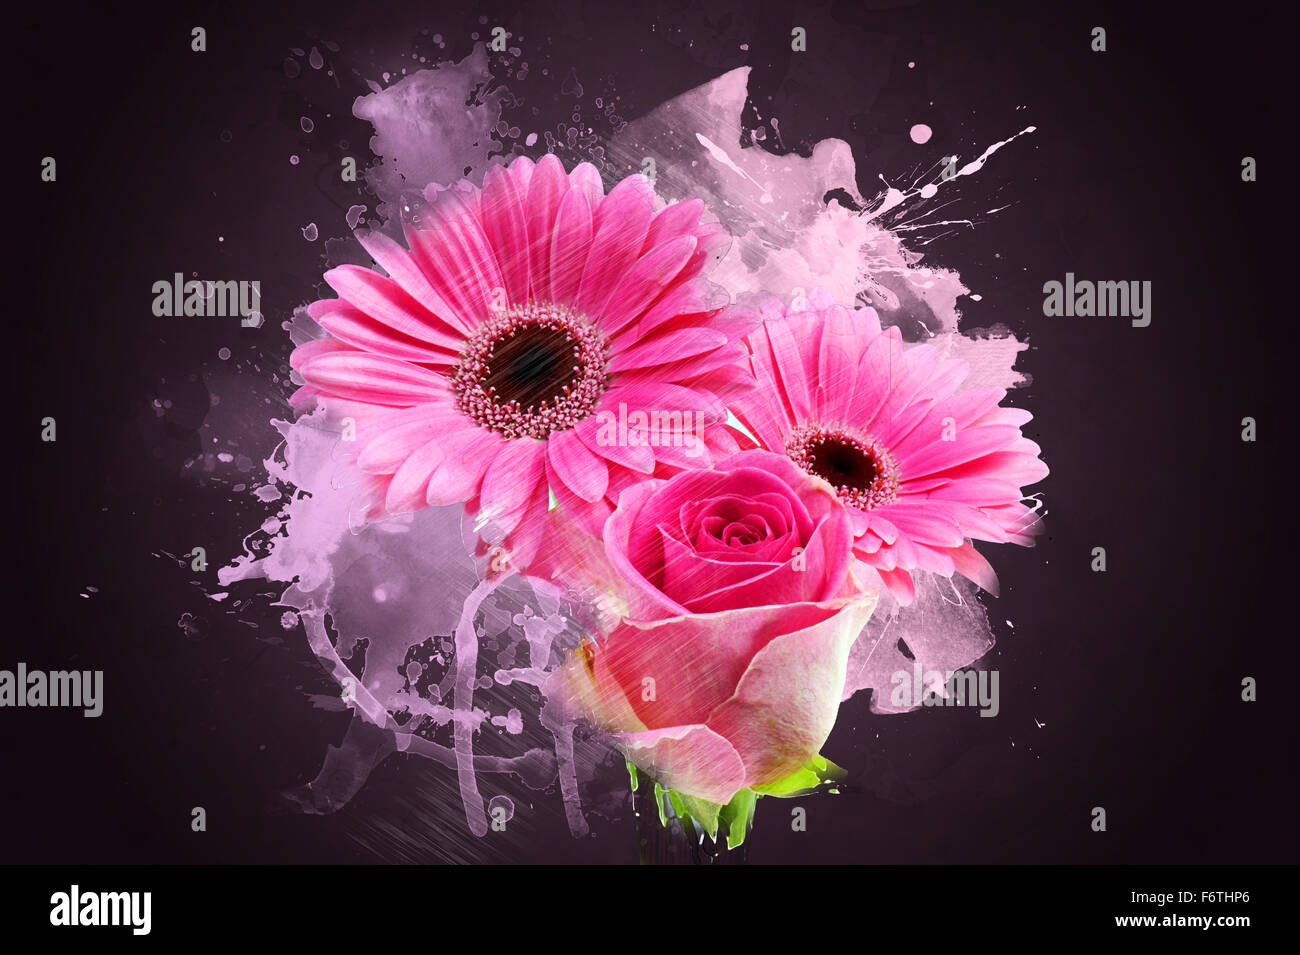 Grunge style abstract background of Gerbera daisies and rose Stock Photo